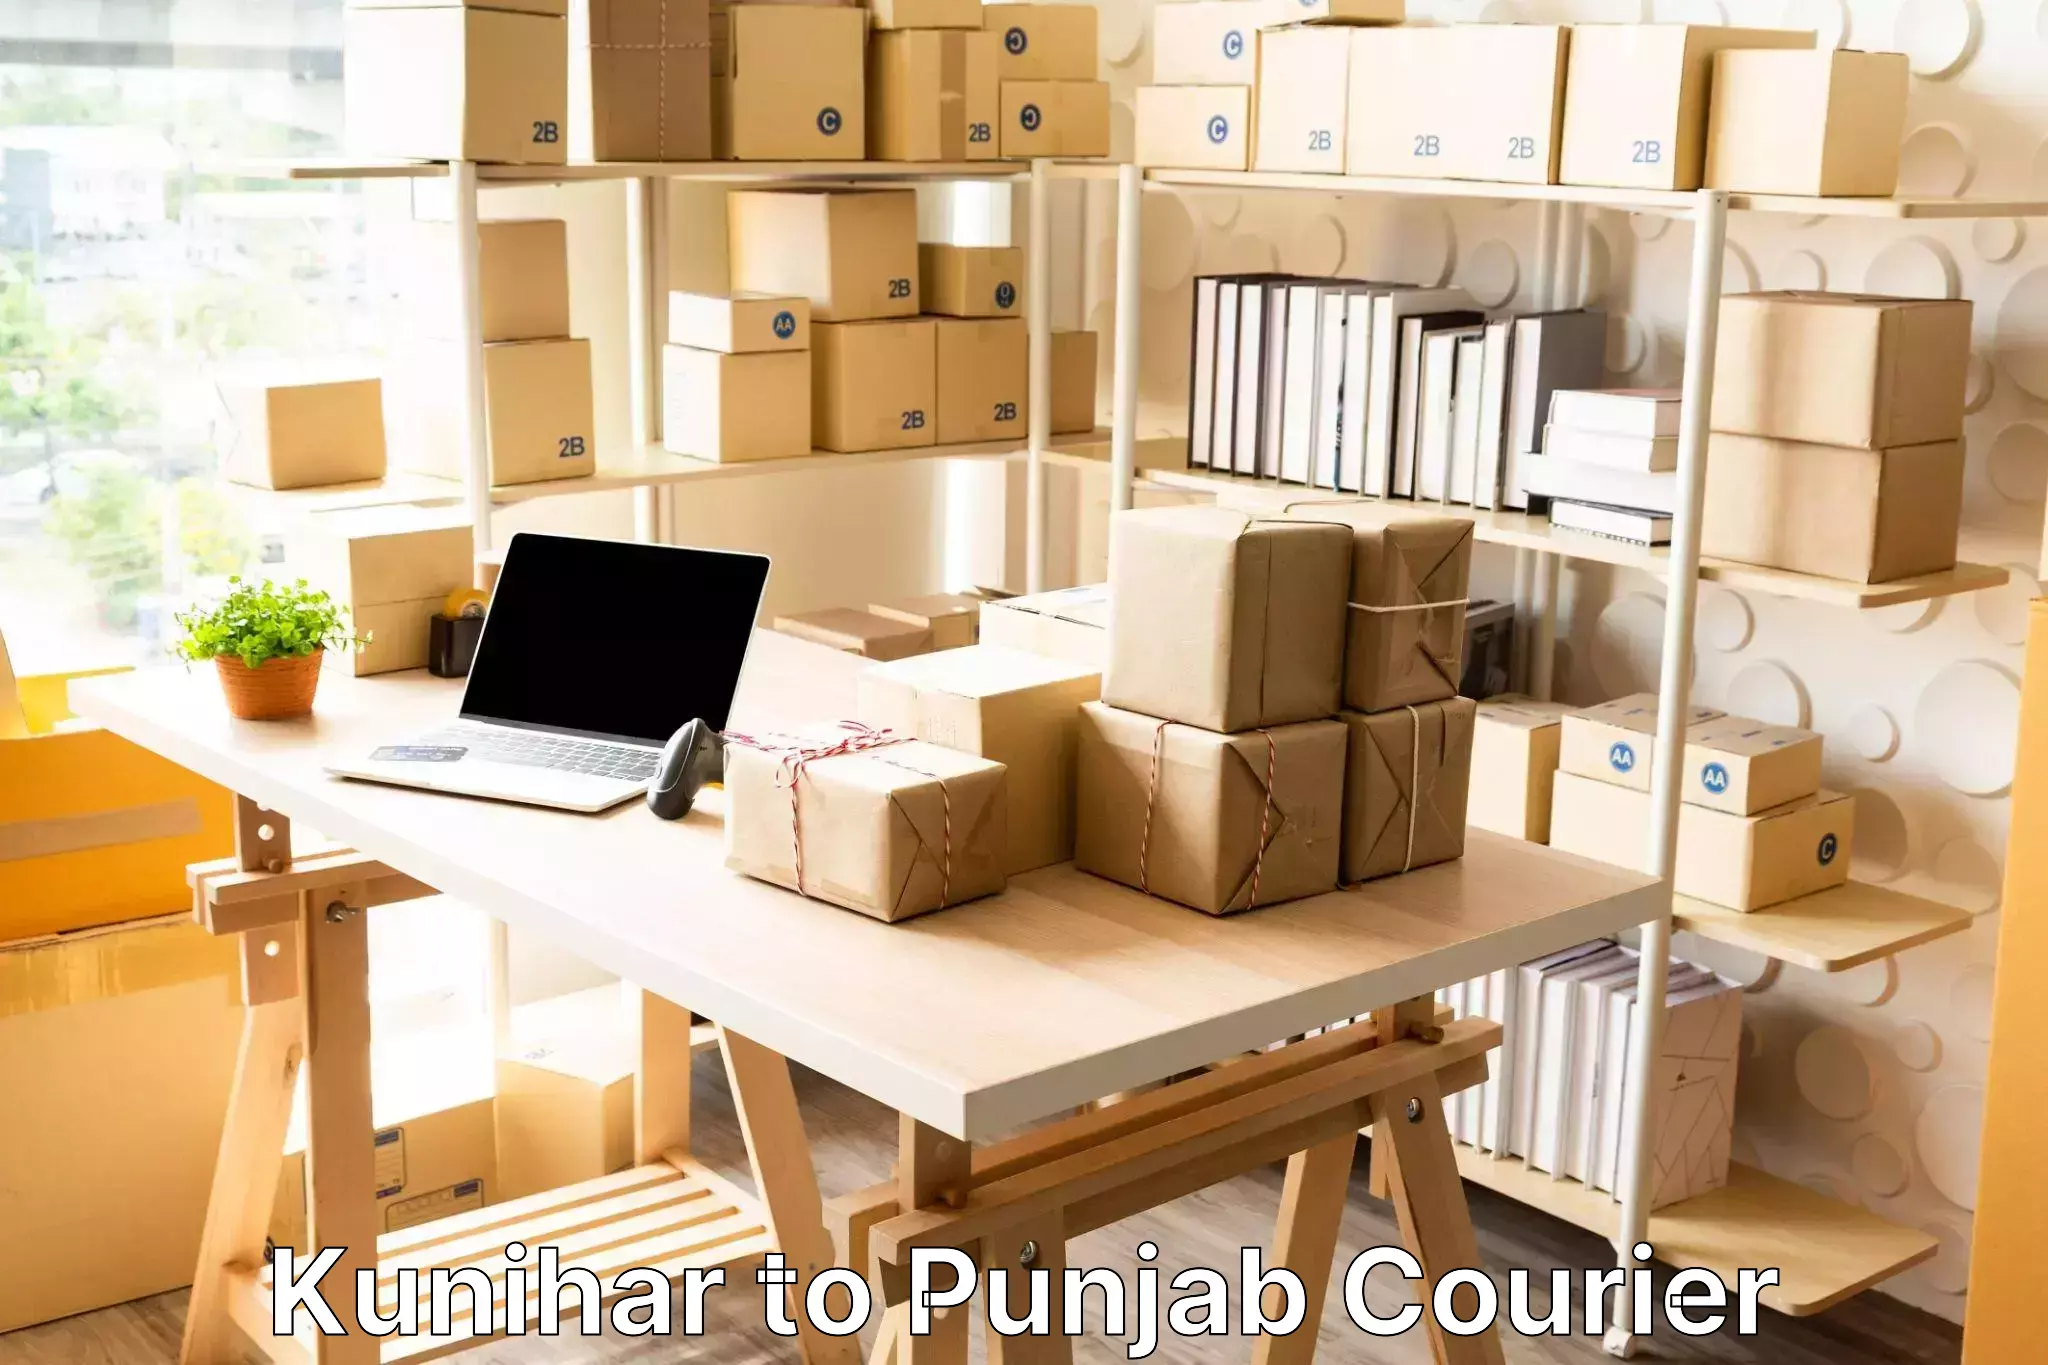 Personal luggage delivery in Kunihar to Punjab